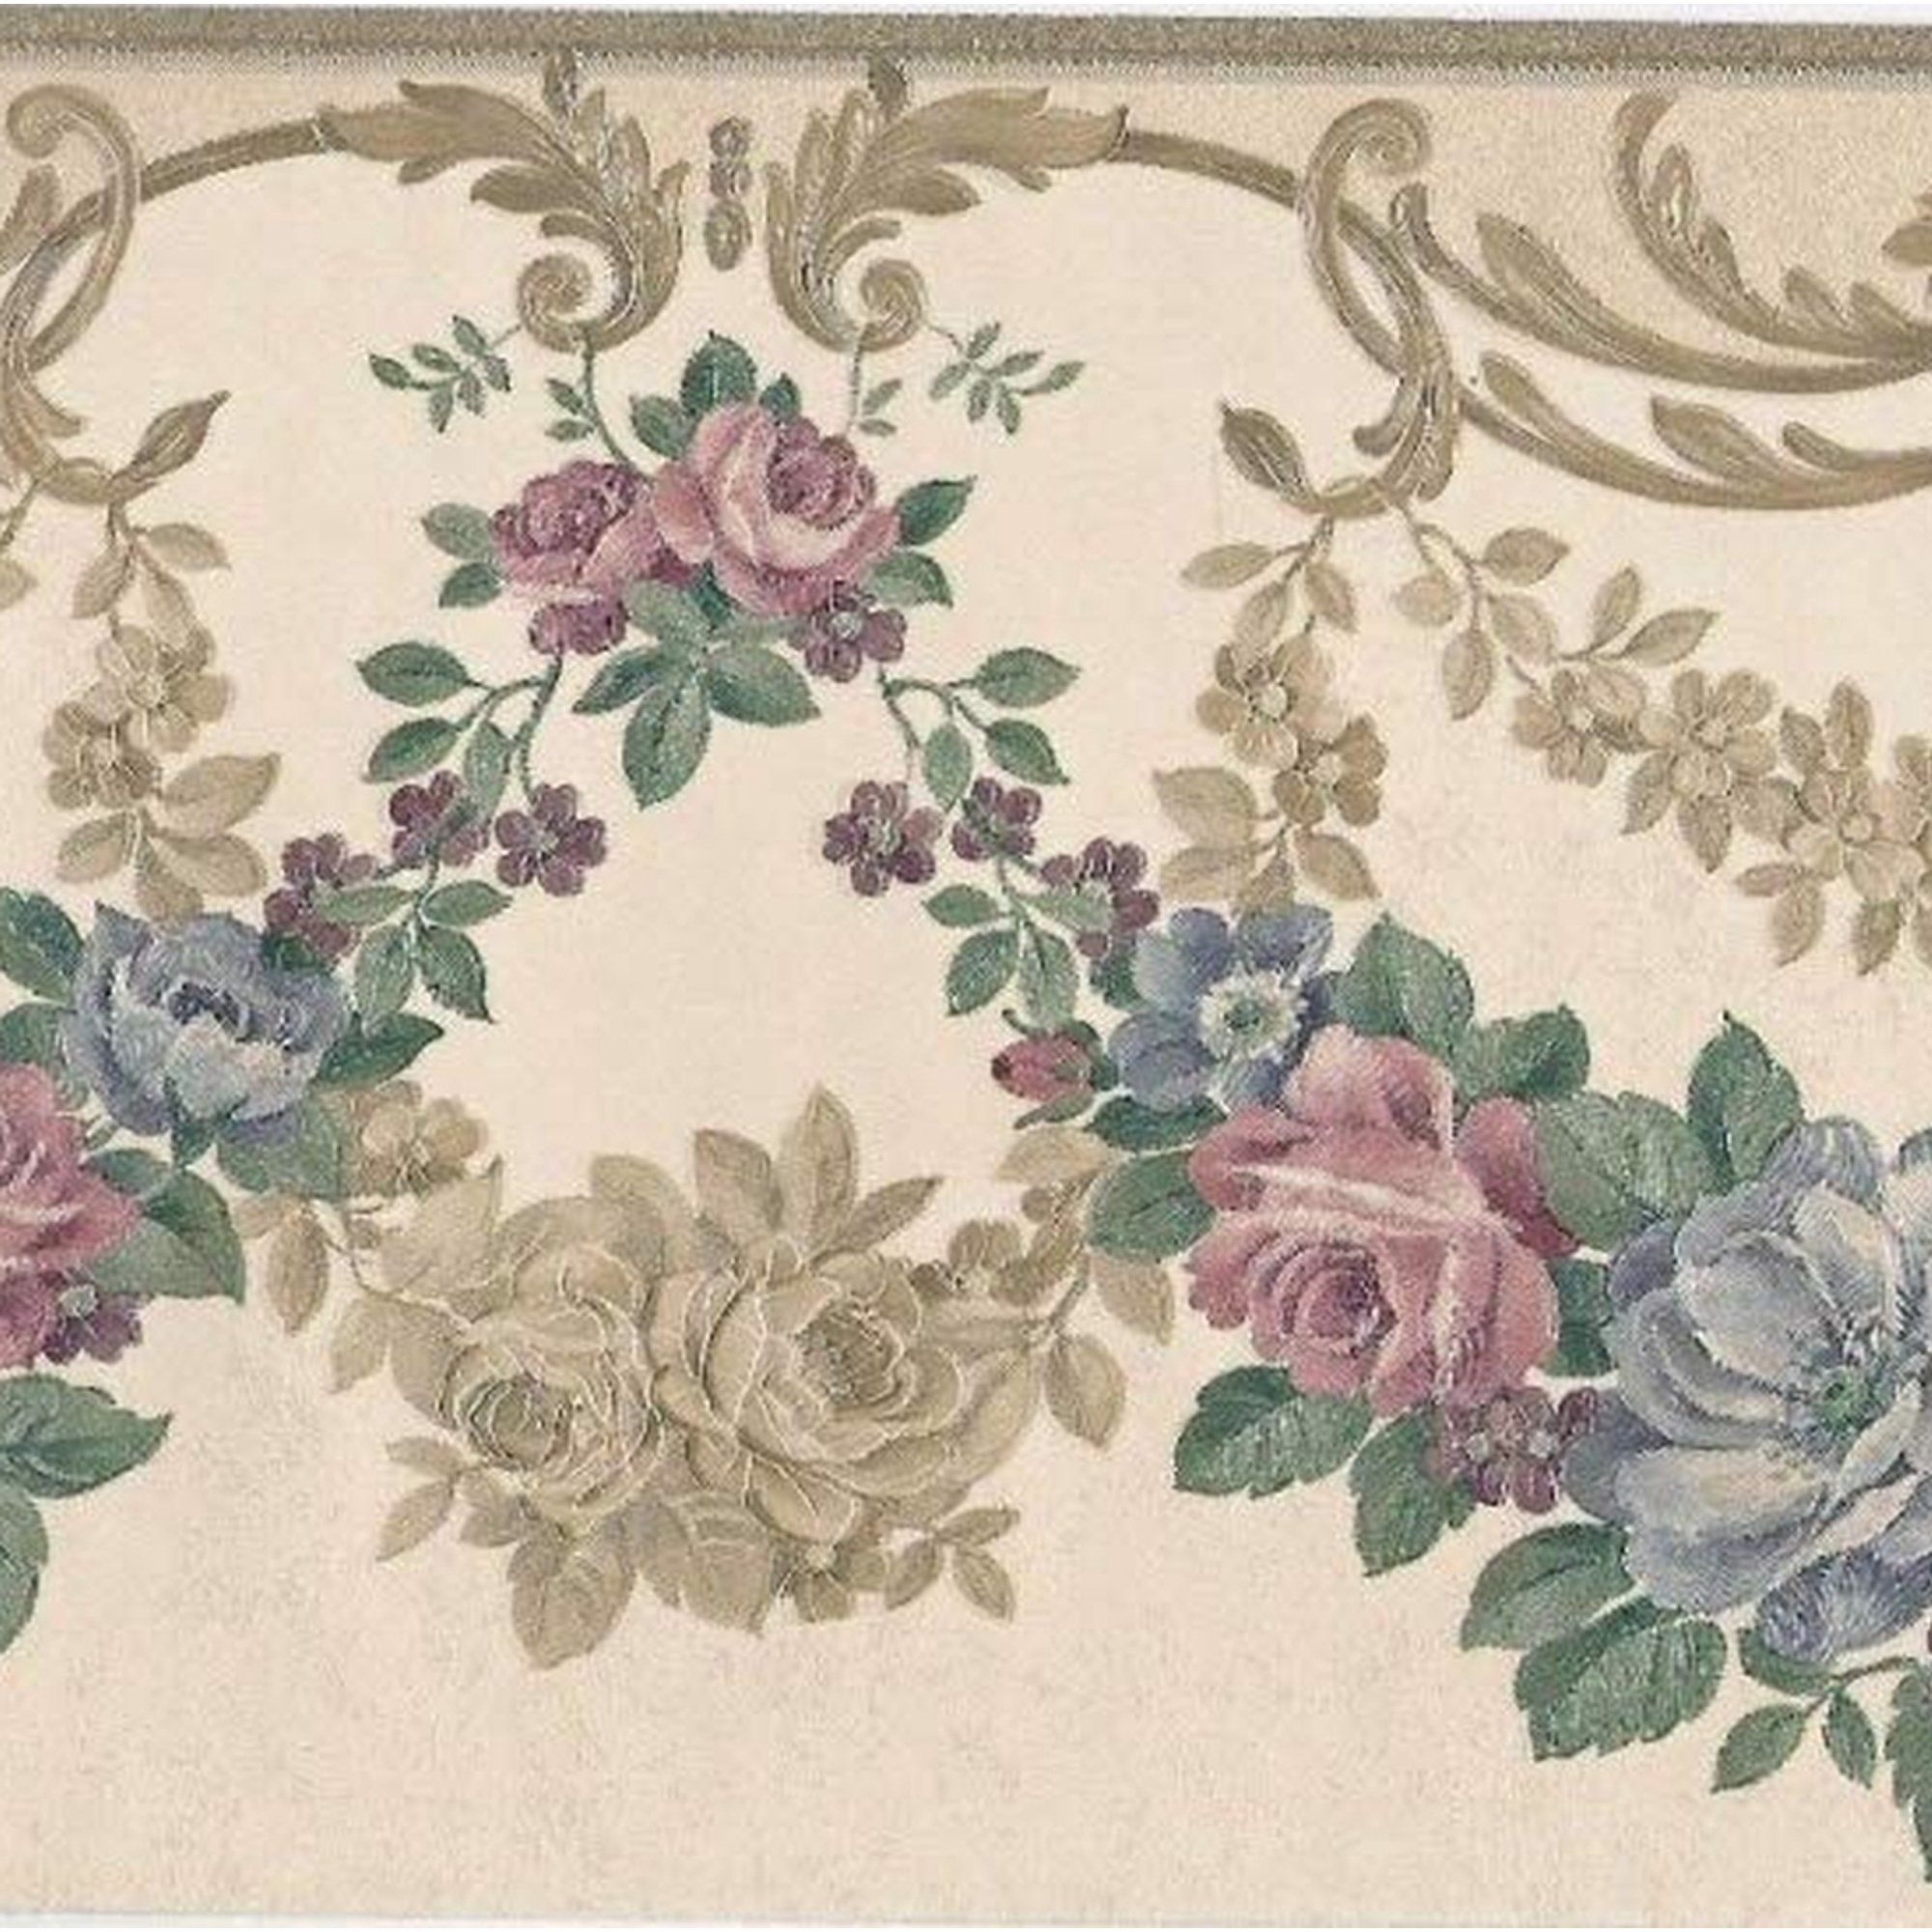 Prepasted Wallpaper Border Green, Pink, Gold, Blue Roses Garlands, Crown Molding Wall Border Retro Design, 15 ft x 7 in (4.57m x 17.78cm)